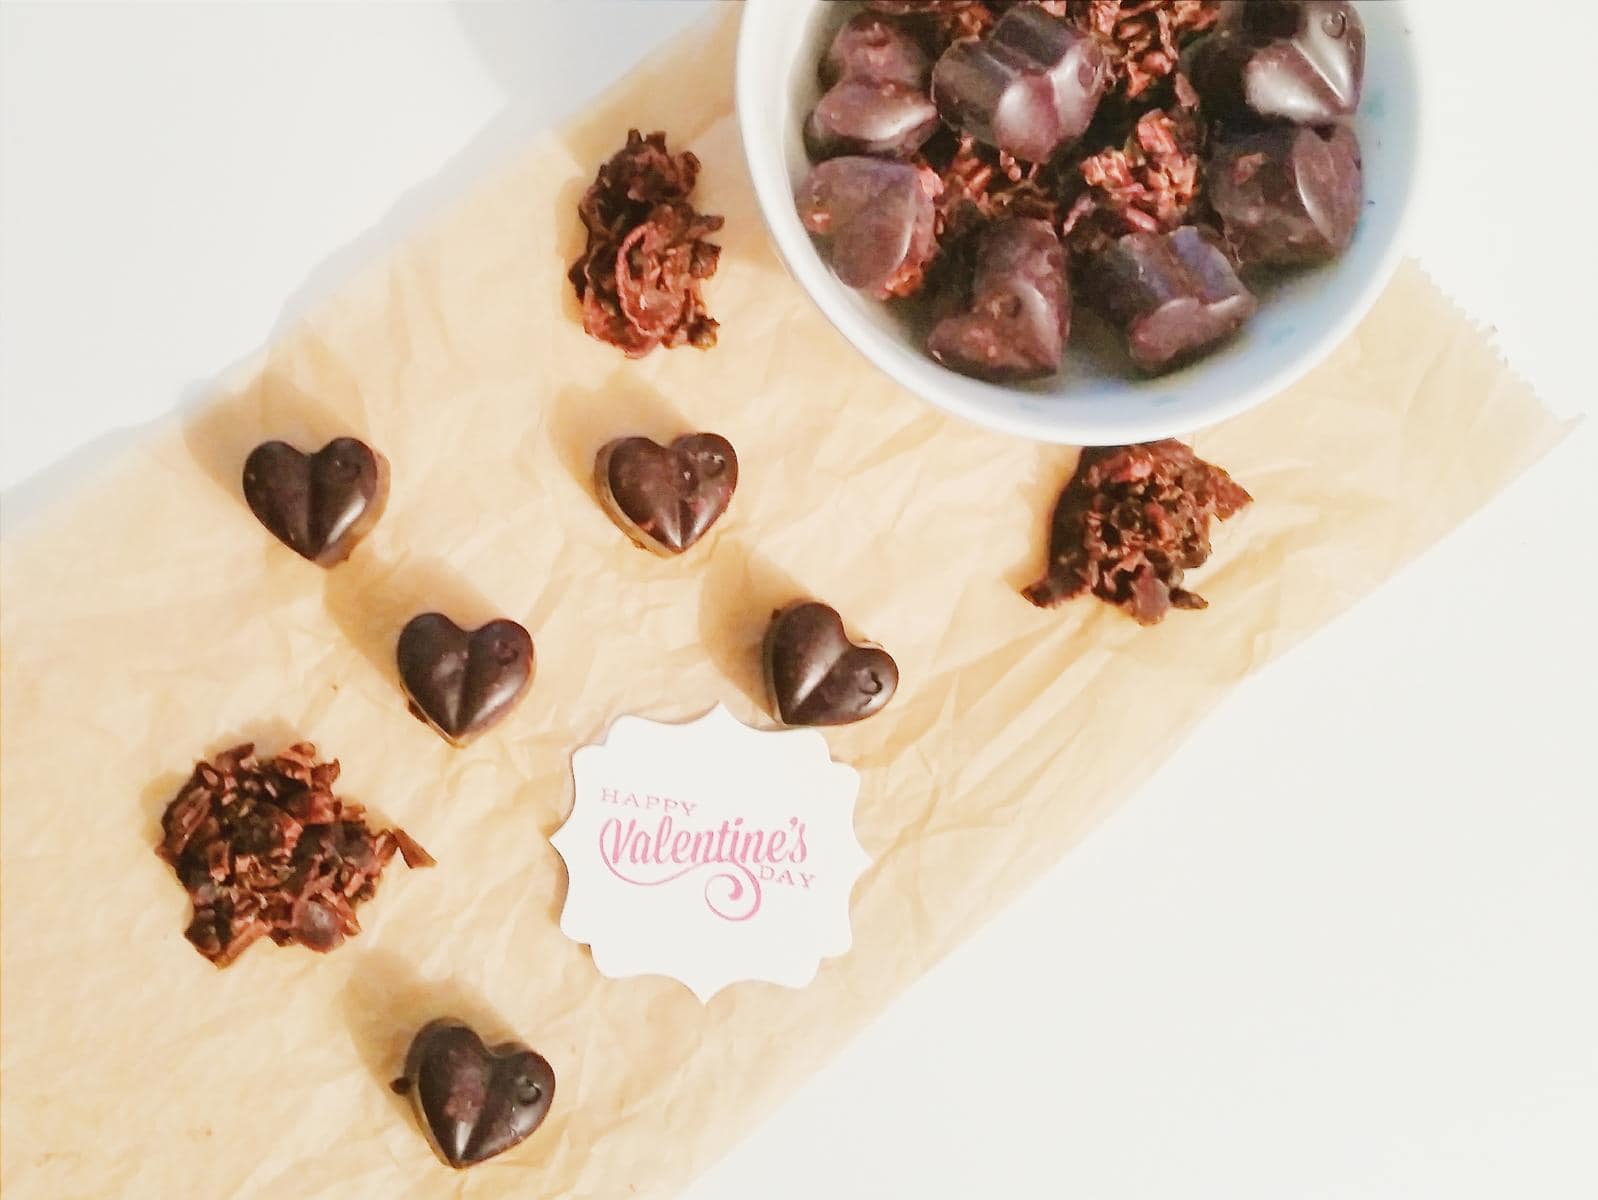 Homemade chocolate for Valentine's Day